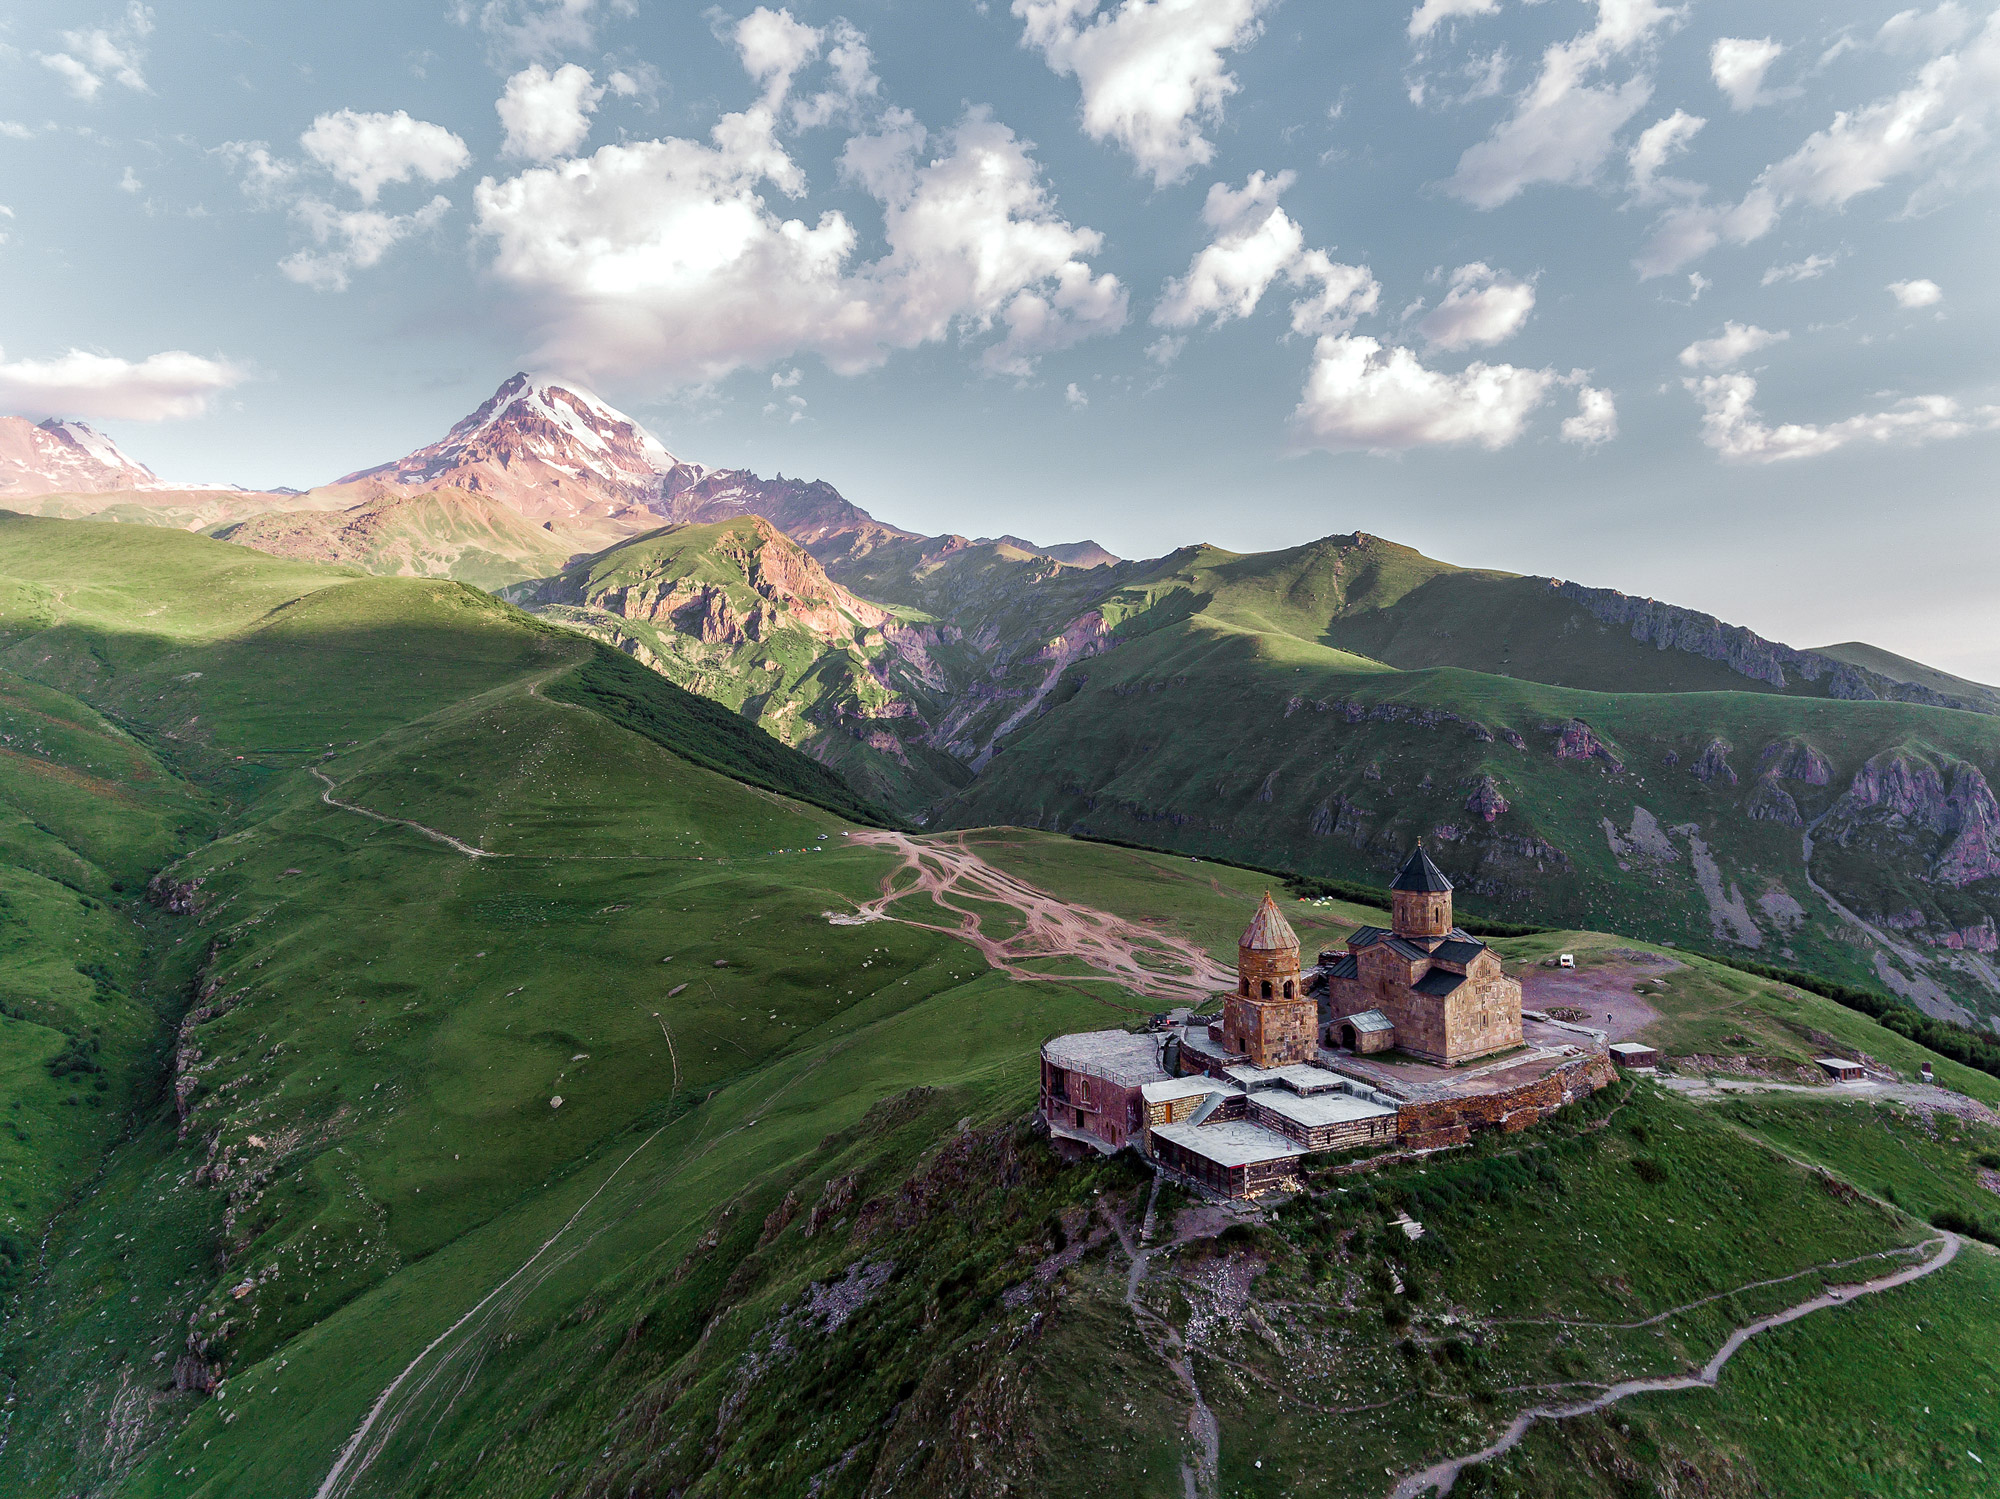 A remote hilltop monastery surrounded by gorges and mountains